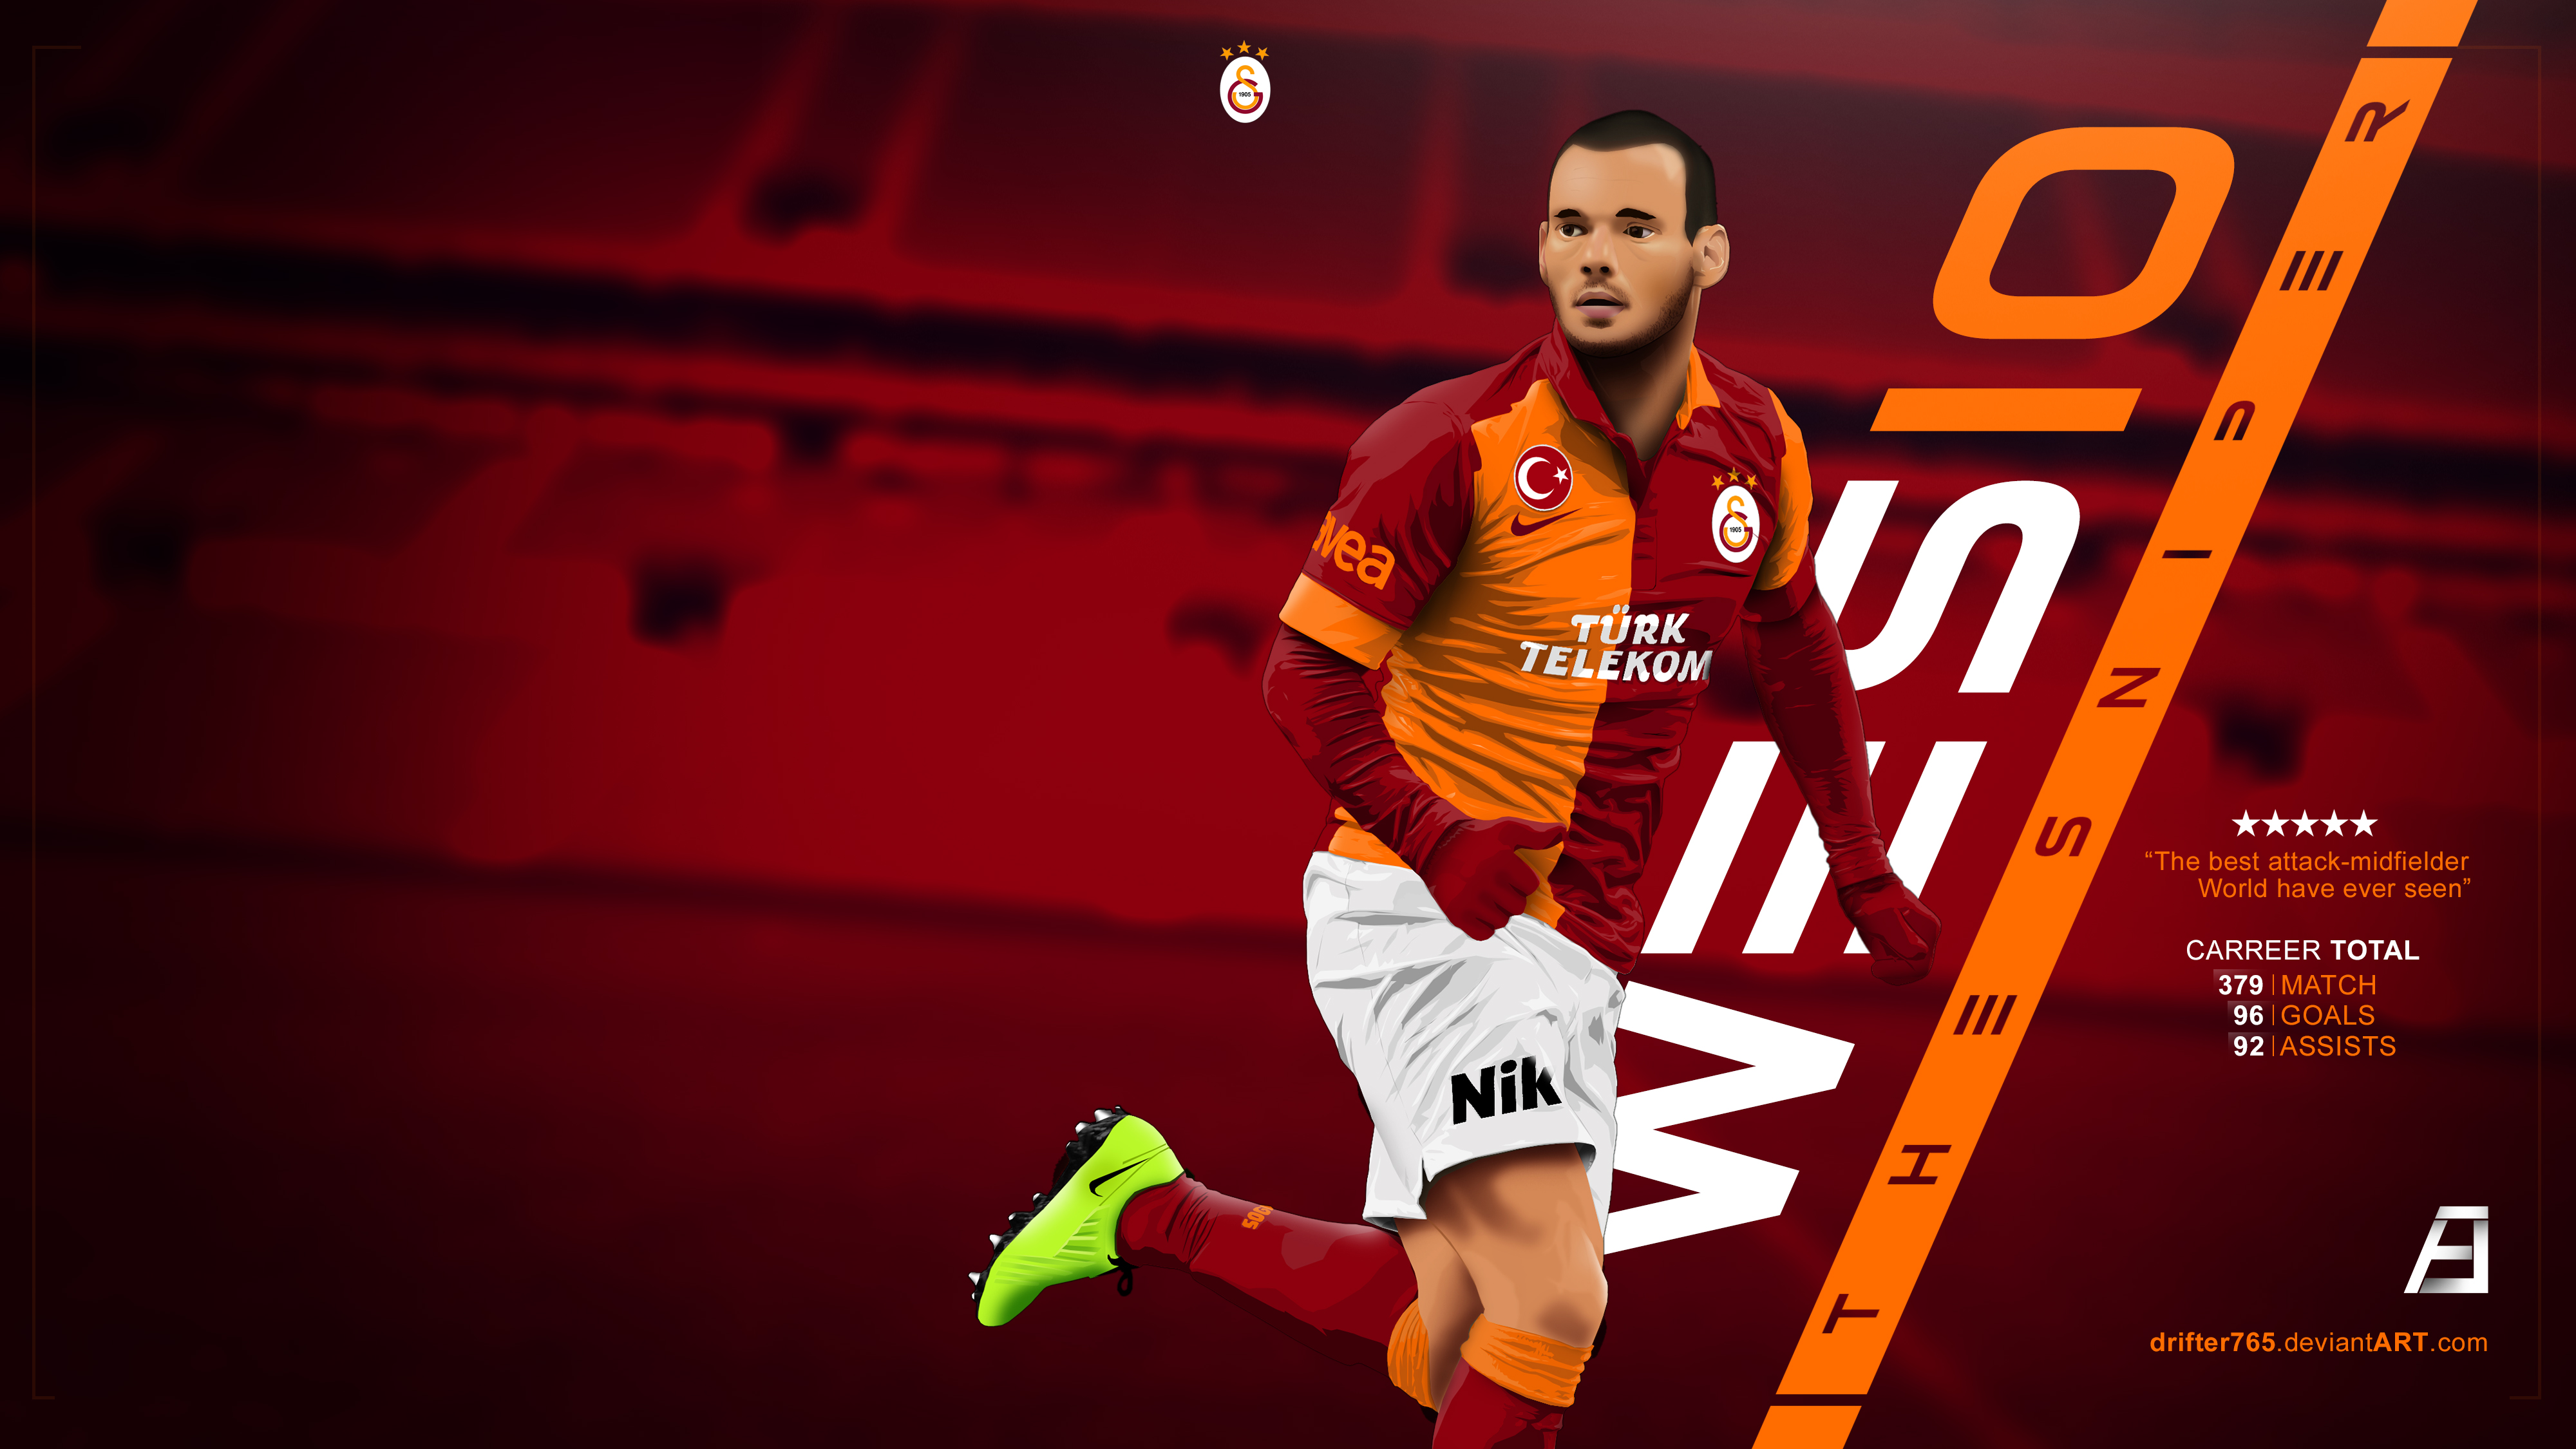 Wesley Sneijder By Drifter765